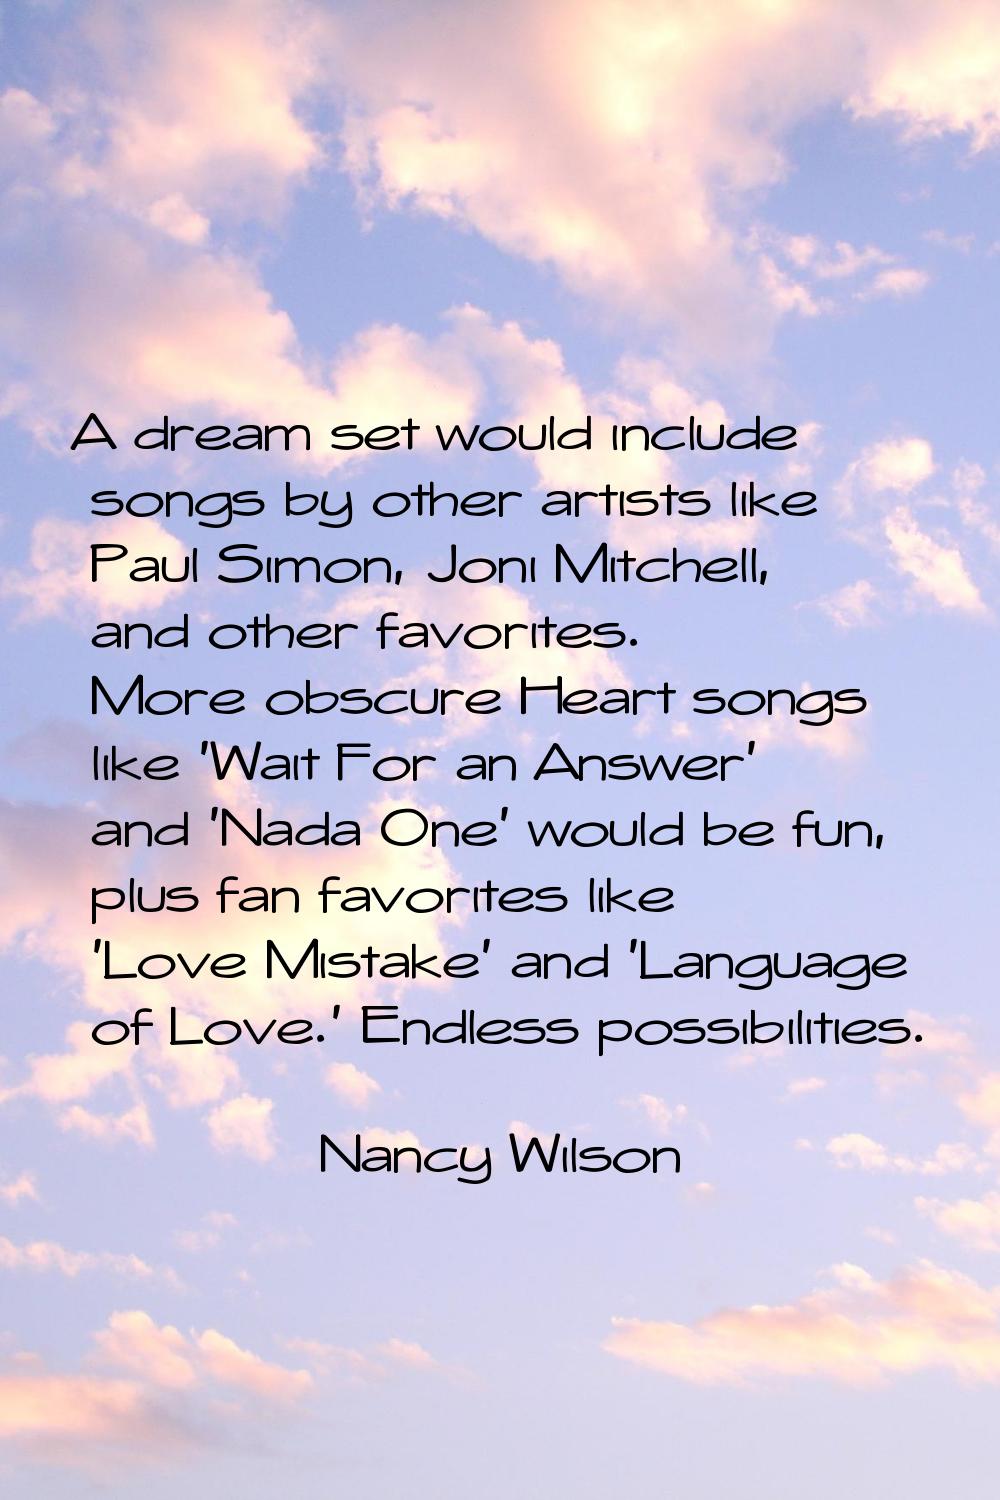 A dream set would include songs by other artists like Paul Simon, Joni Mitchell, and other favorite